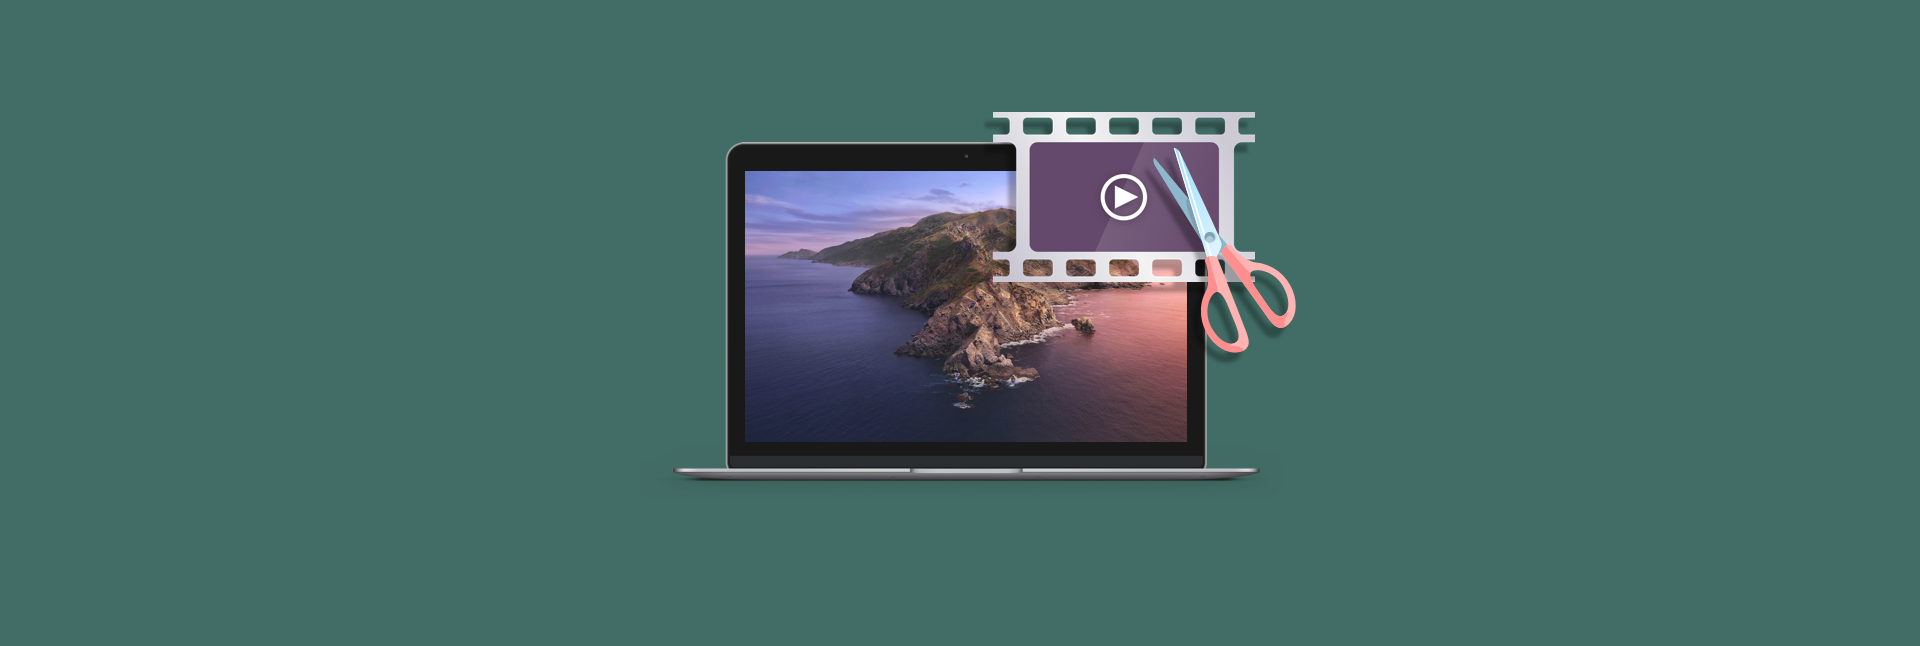 how to crop a video on mac quicktime